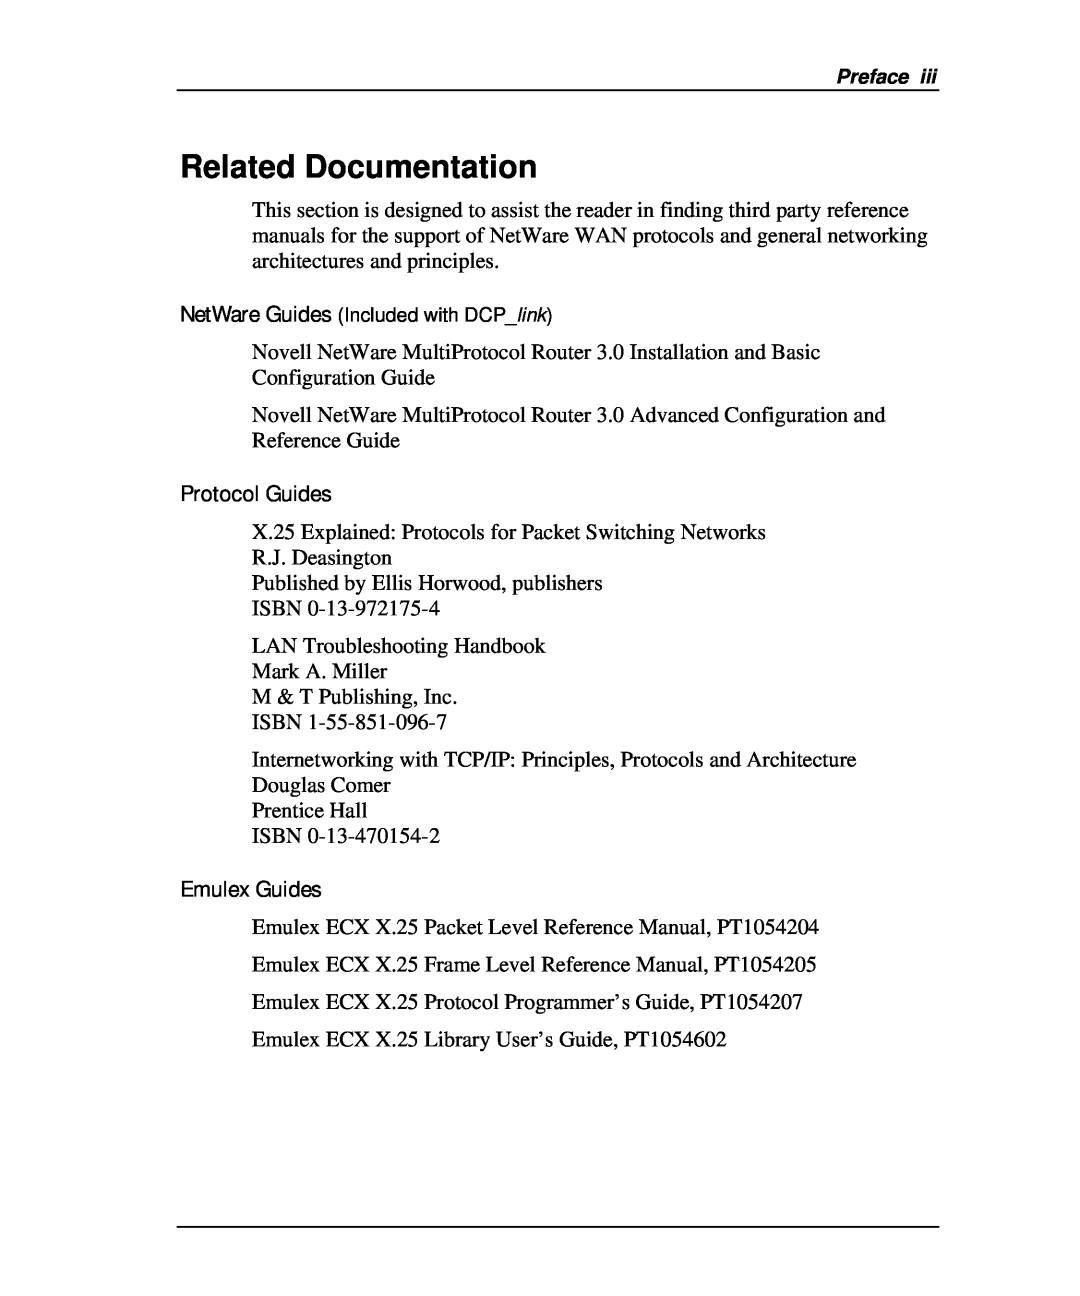 Emulex DCP_link manual Related Documentation, Protocol Guides, Emulex Guides, NetWare Guides Included with DCPlink 